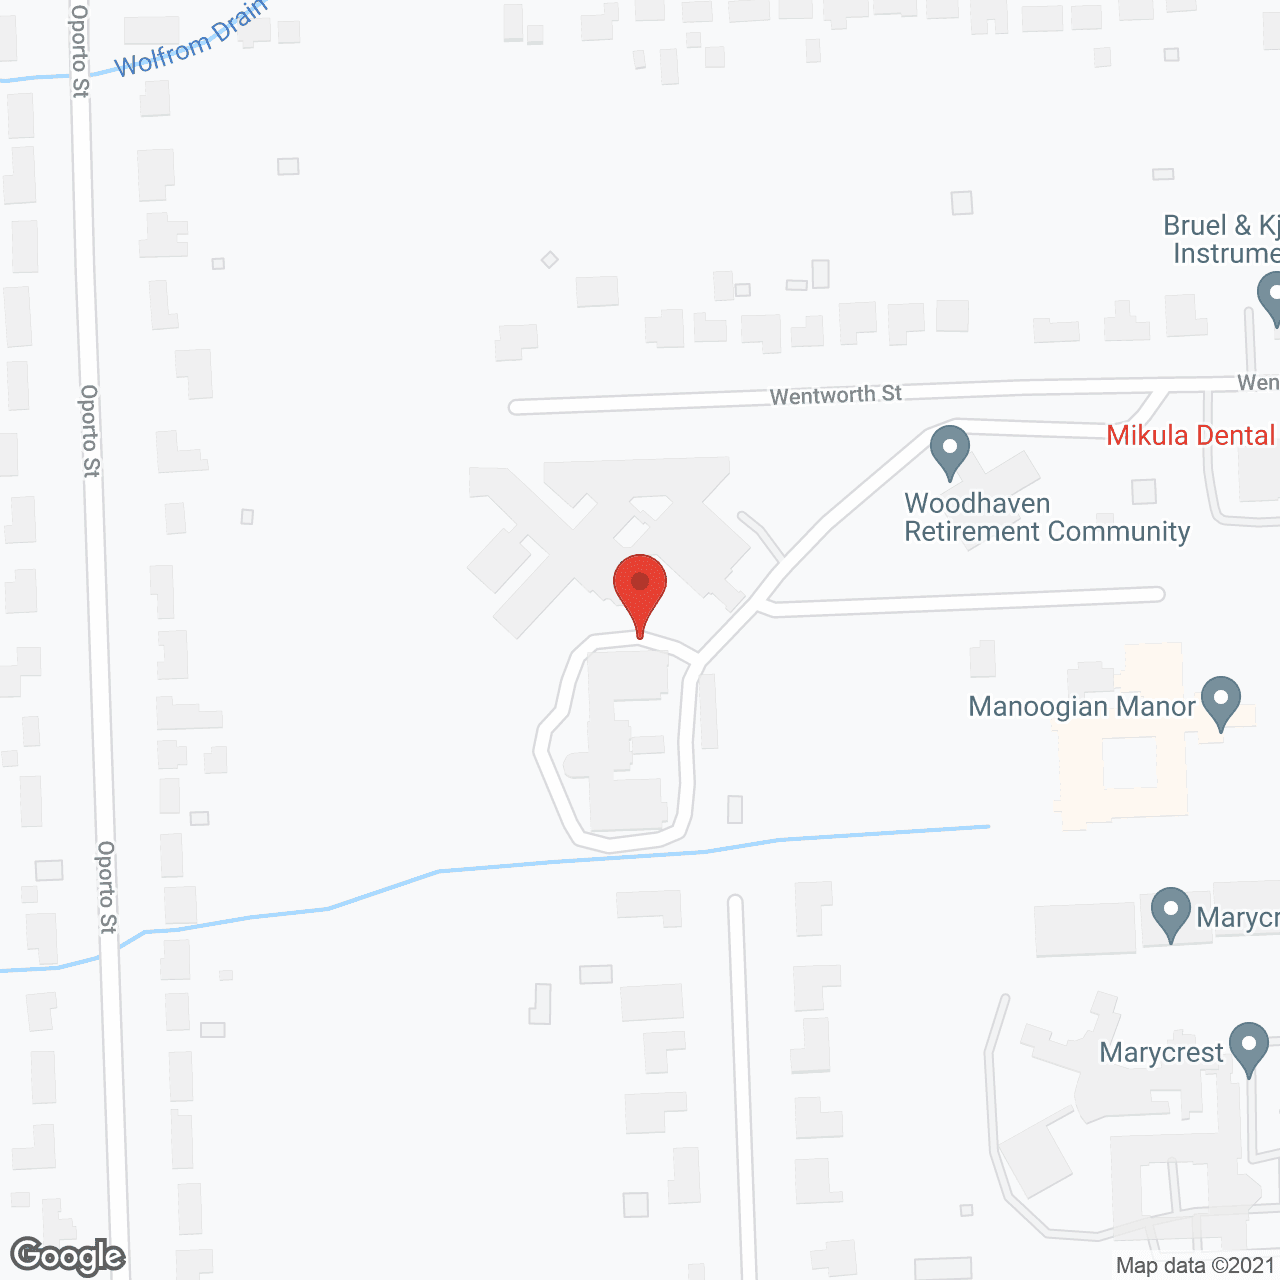 The Woodhaven Retirement Community in google map